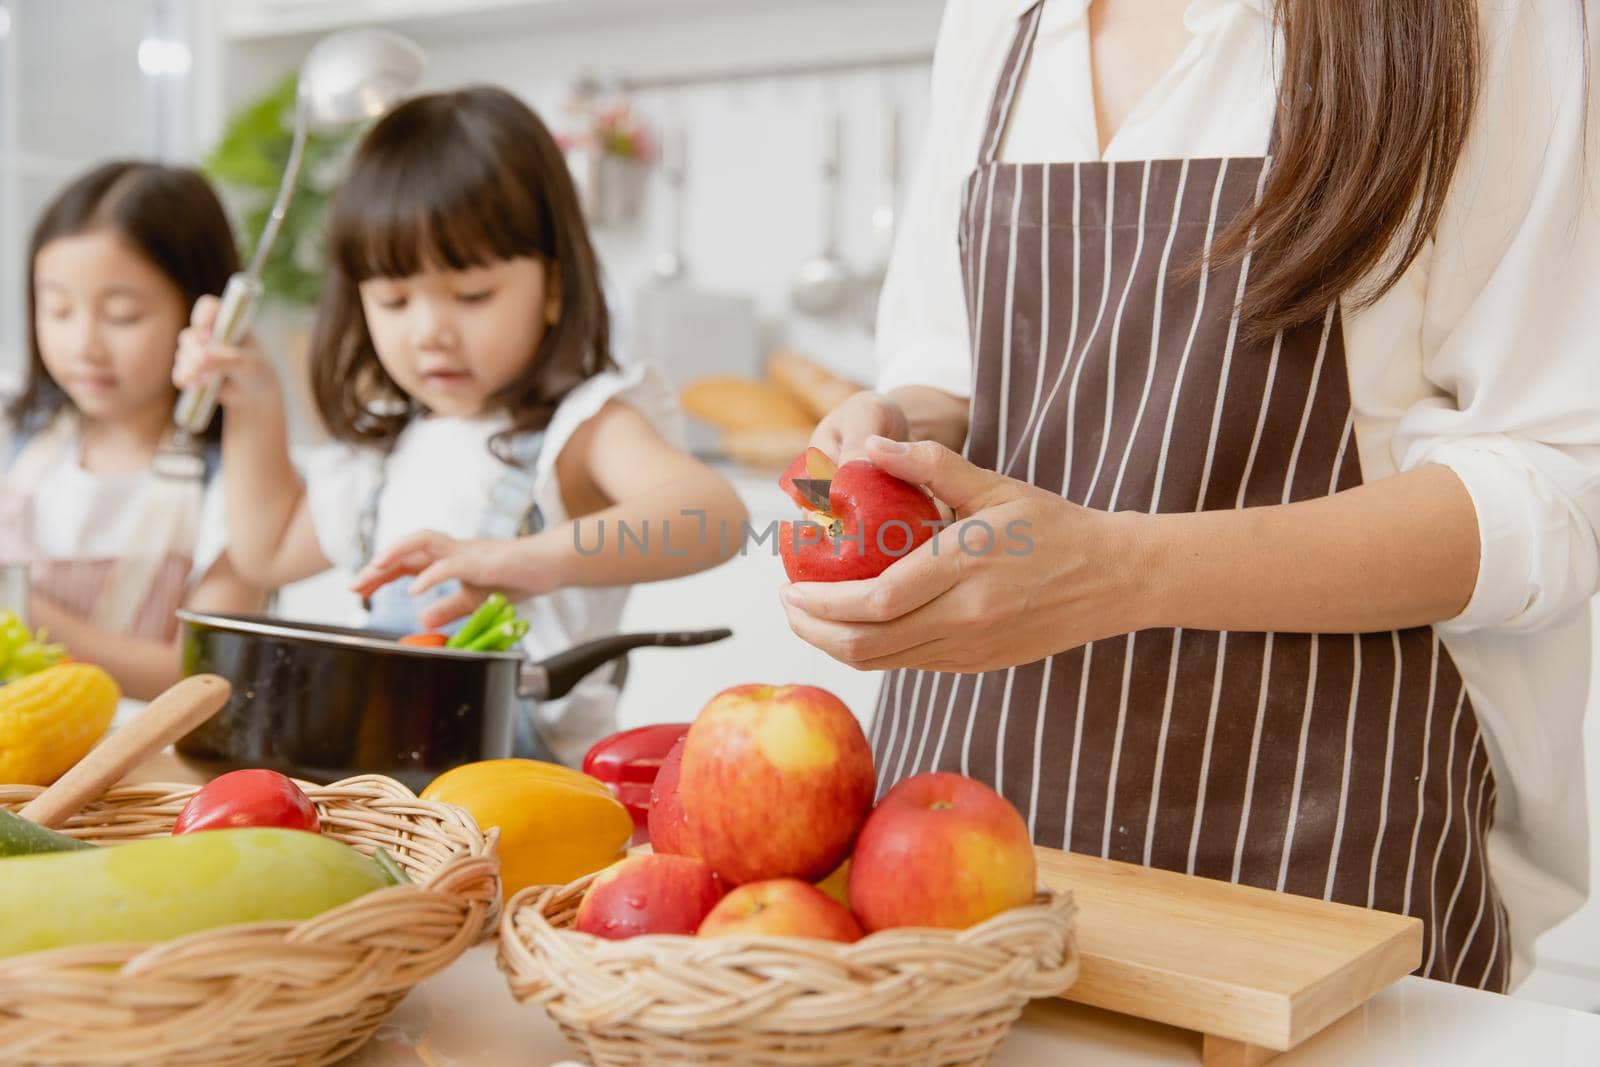 Mother and childs happy to preparing healthy food at home kitchen from vegetables and fruit